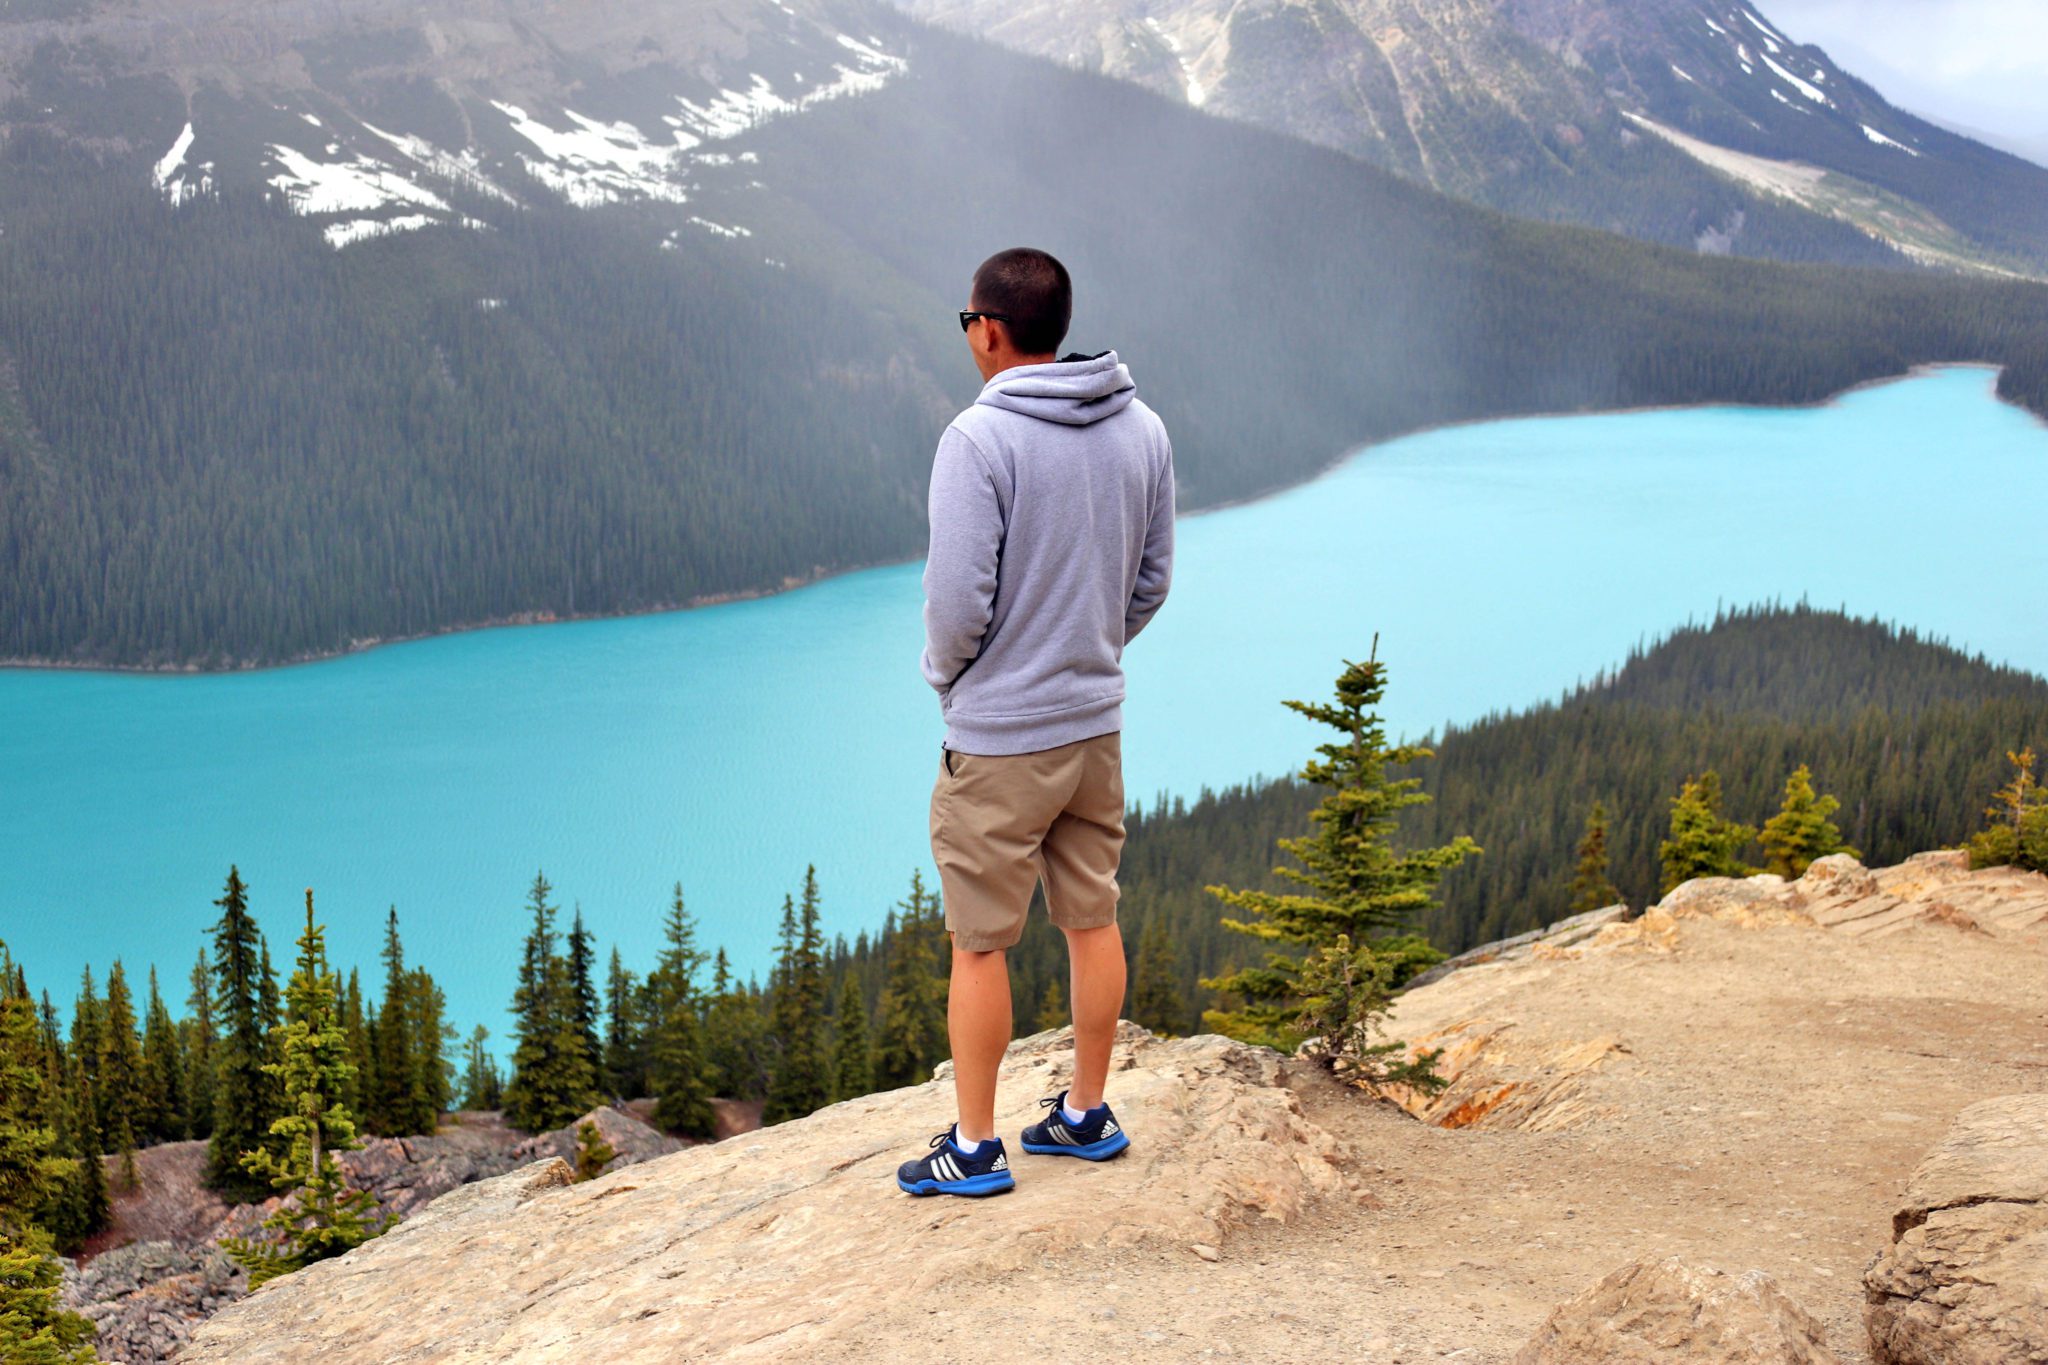 Banff Photography Guide: 15 Amazing Spots to take Photos in Banff | Columbia Ice Fields Parkway Peyto Lake #banff #canada #simplywander #columbiaicefieldsparkway #columbiaicefieldsparkway #peytolake